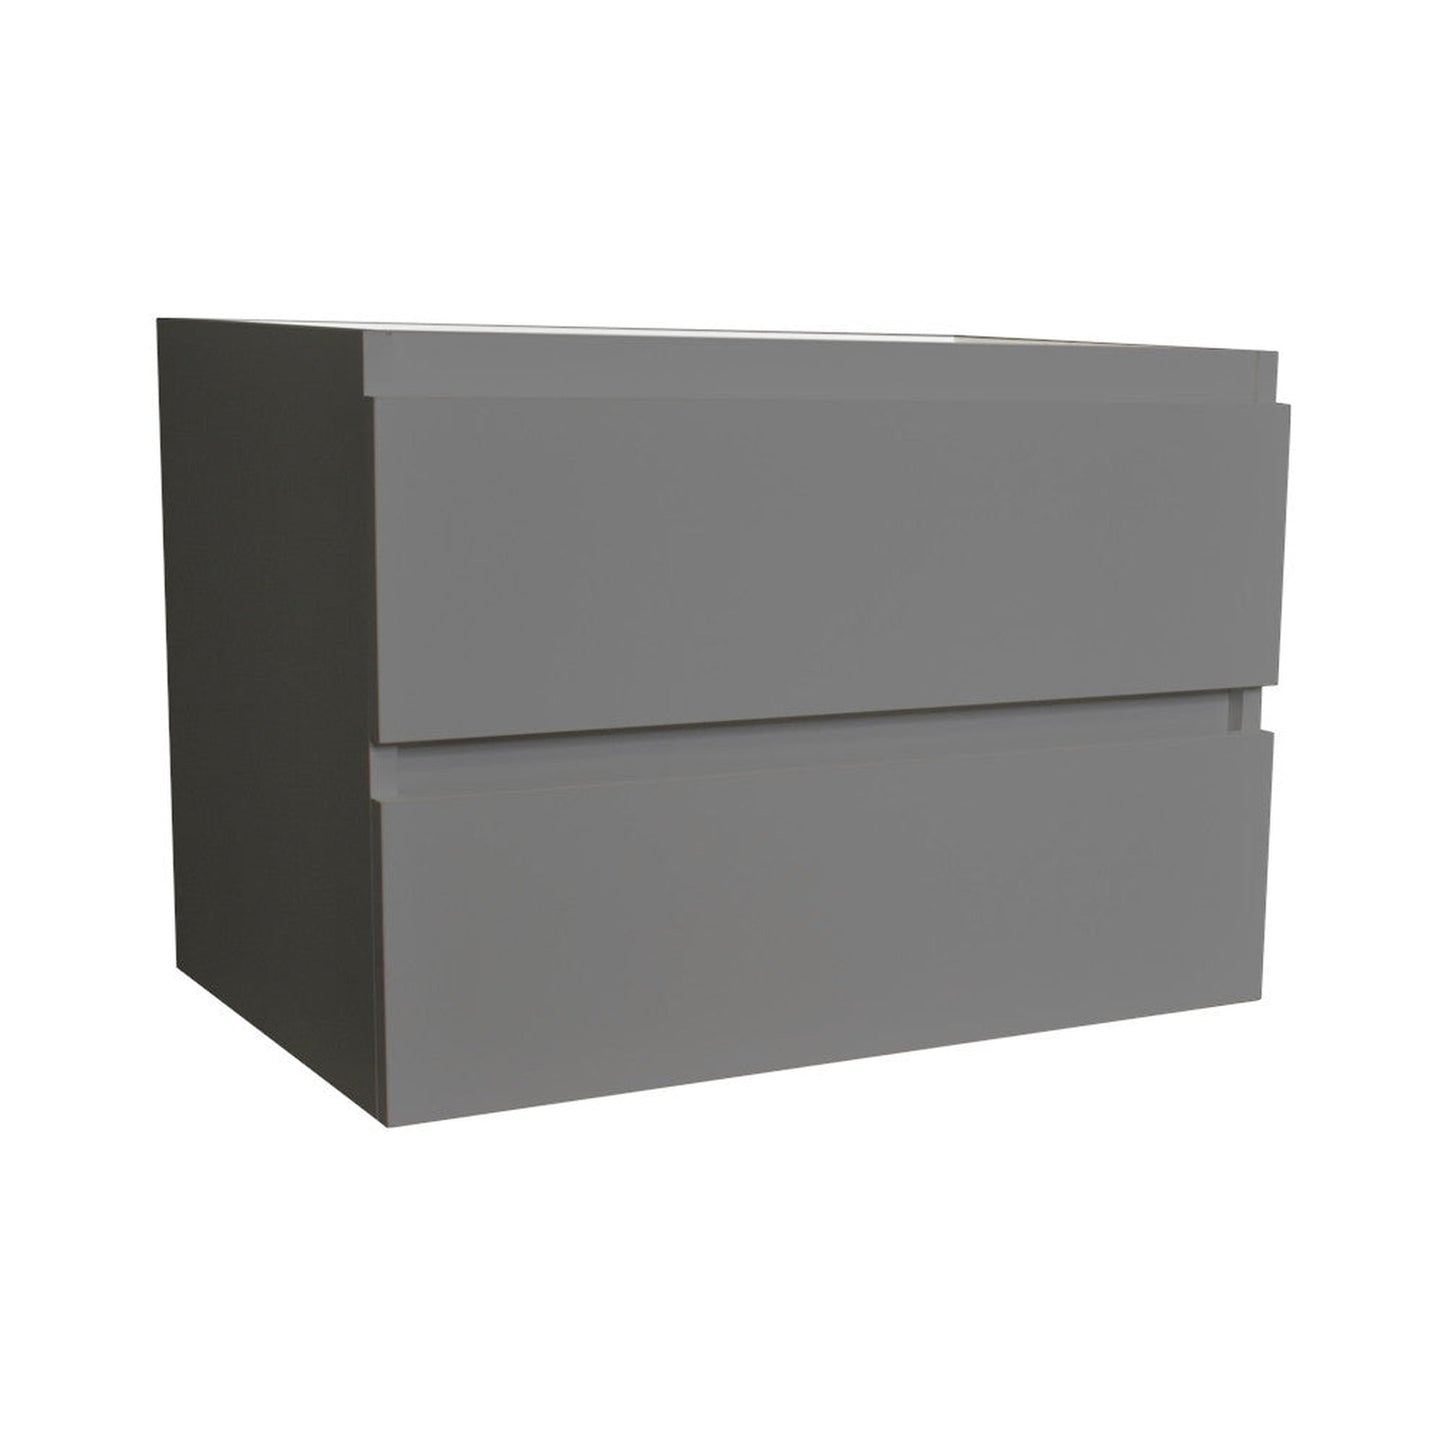 Volpa USA Salt 30" x 20" Gray Wall-Mounted Floating Bathroom Vanity Cabinet with Drawers